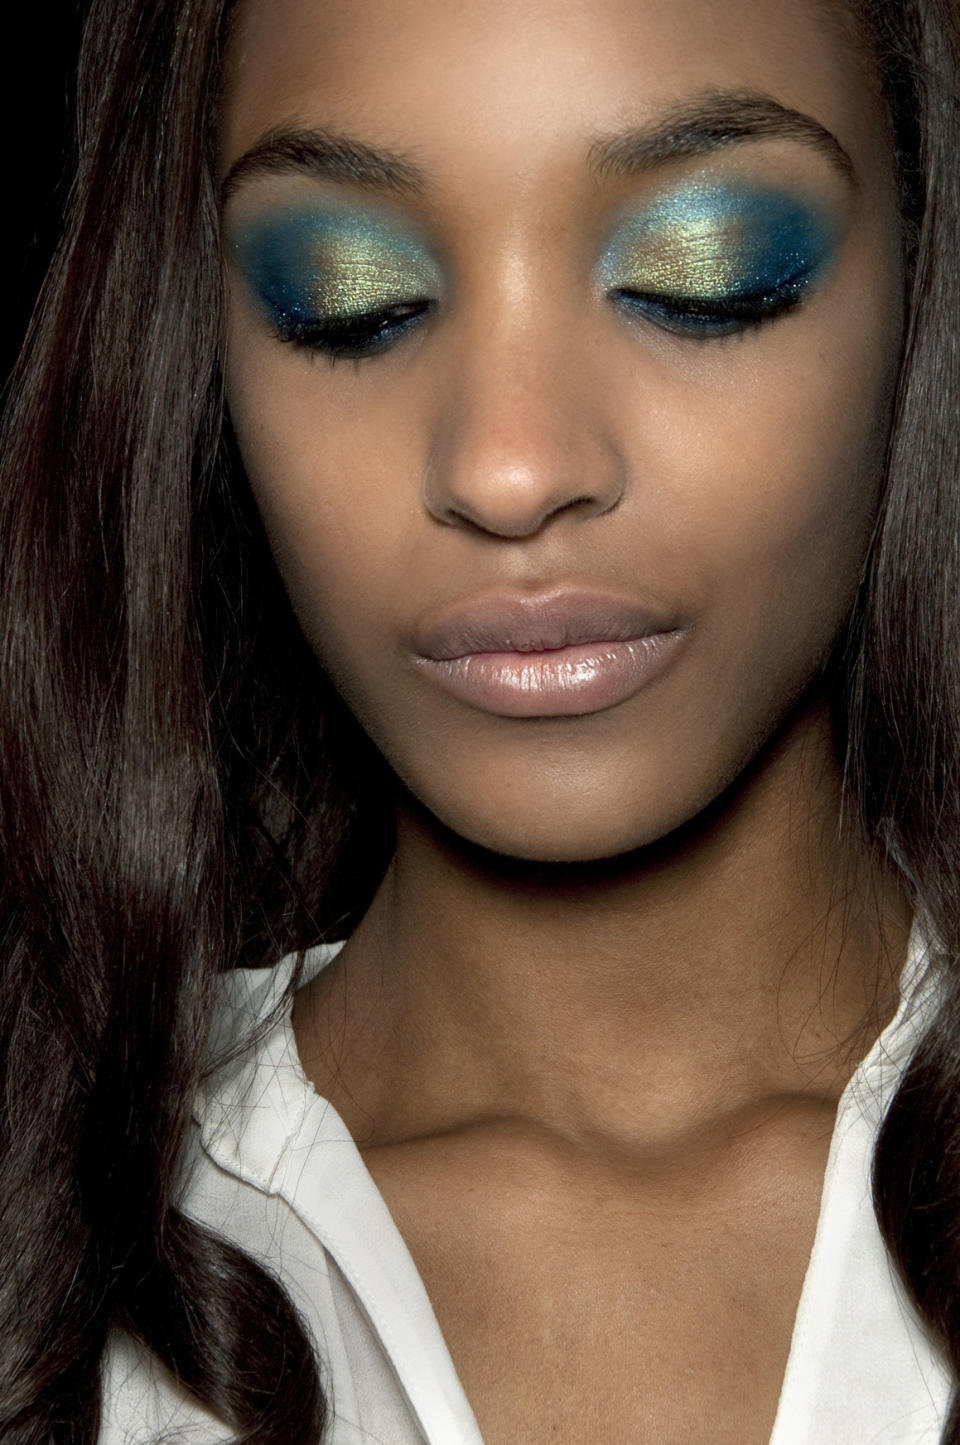 Colorful Eye Shadow in the Daytime